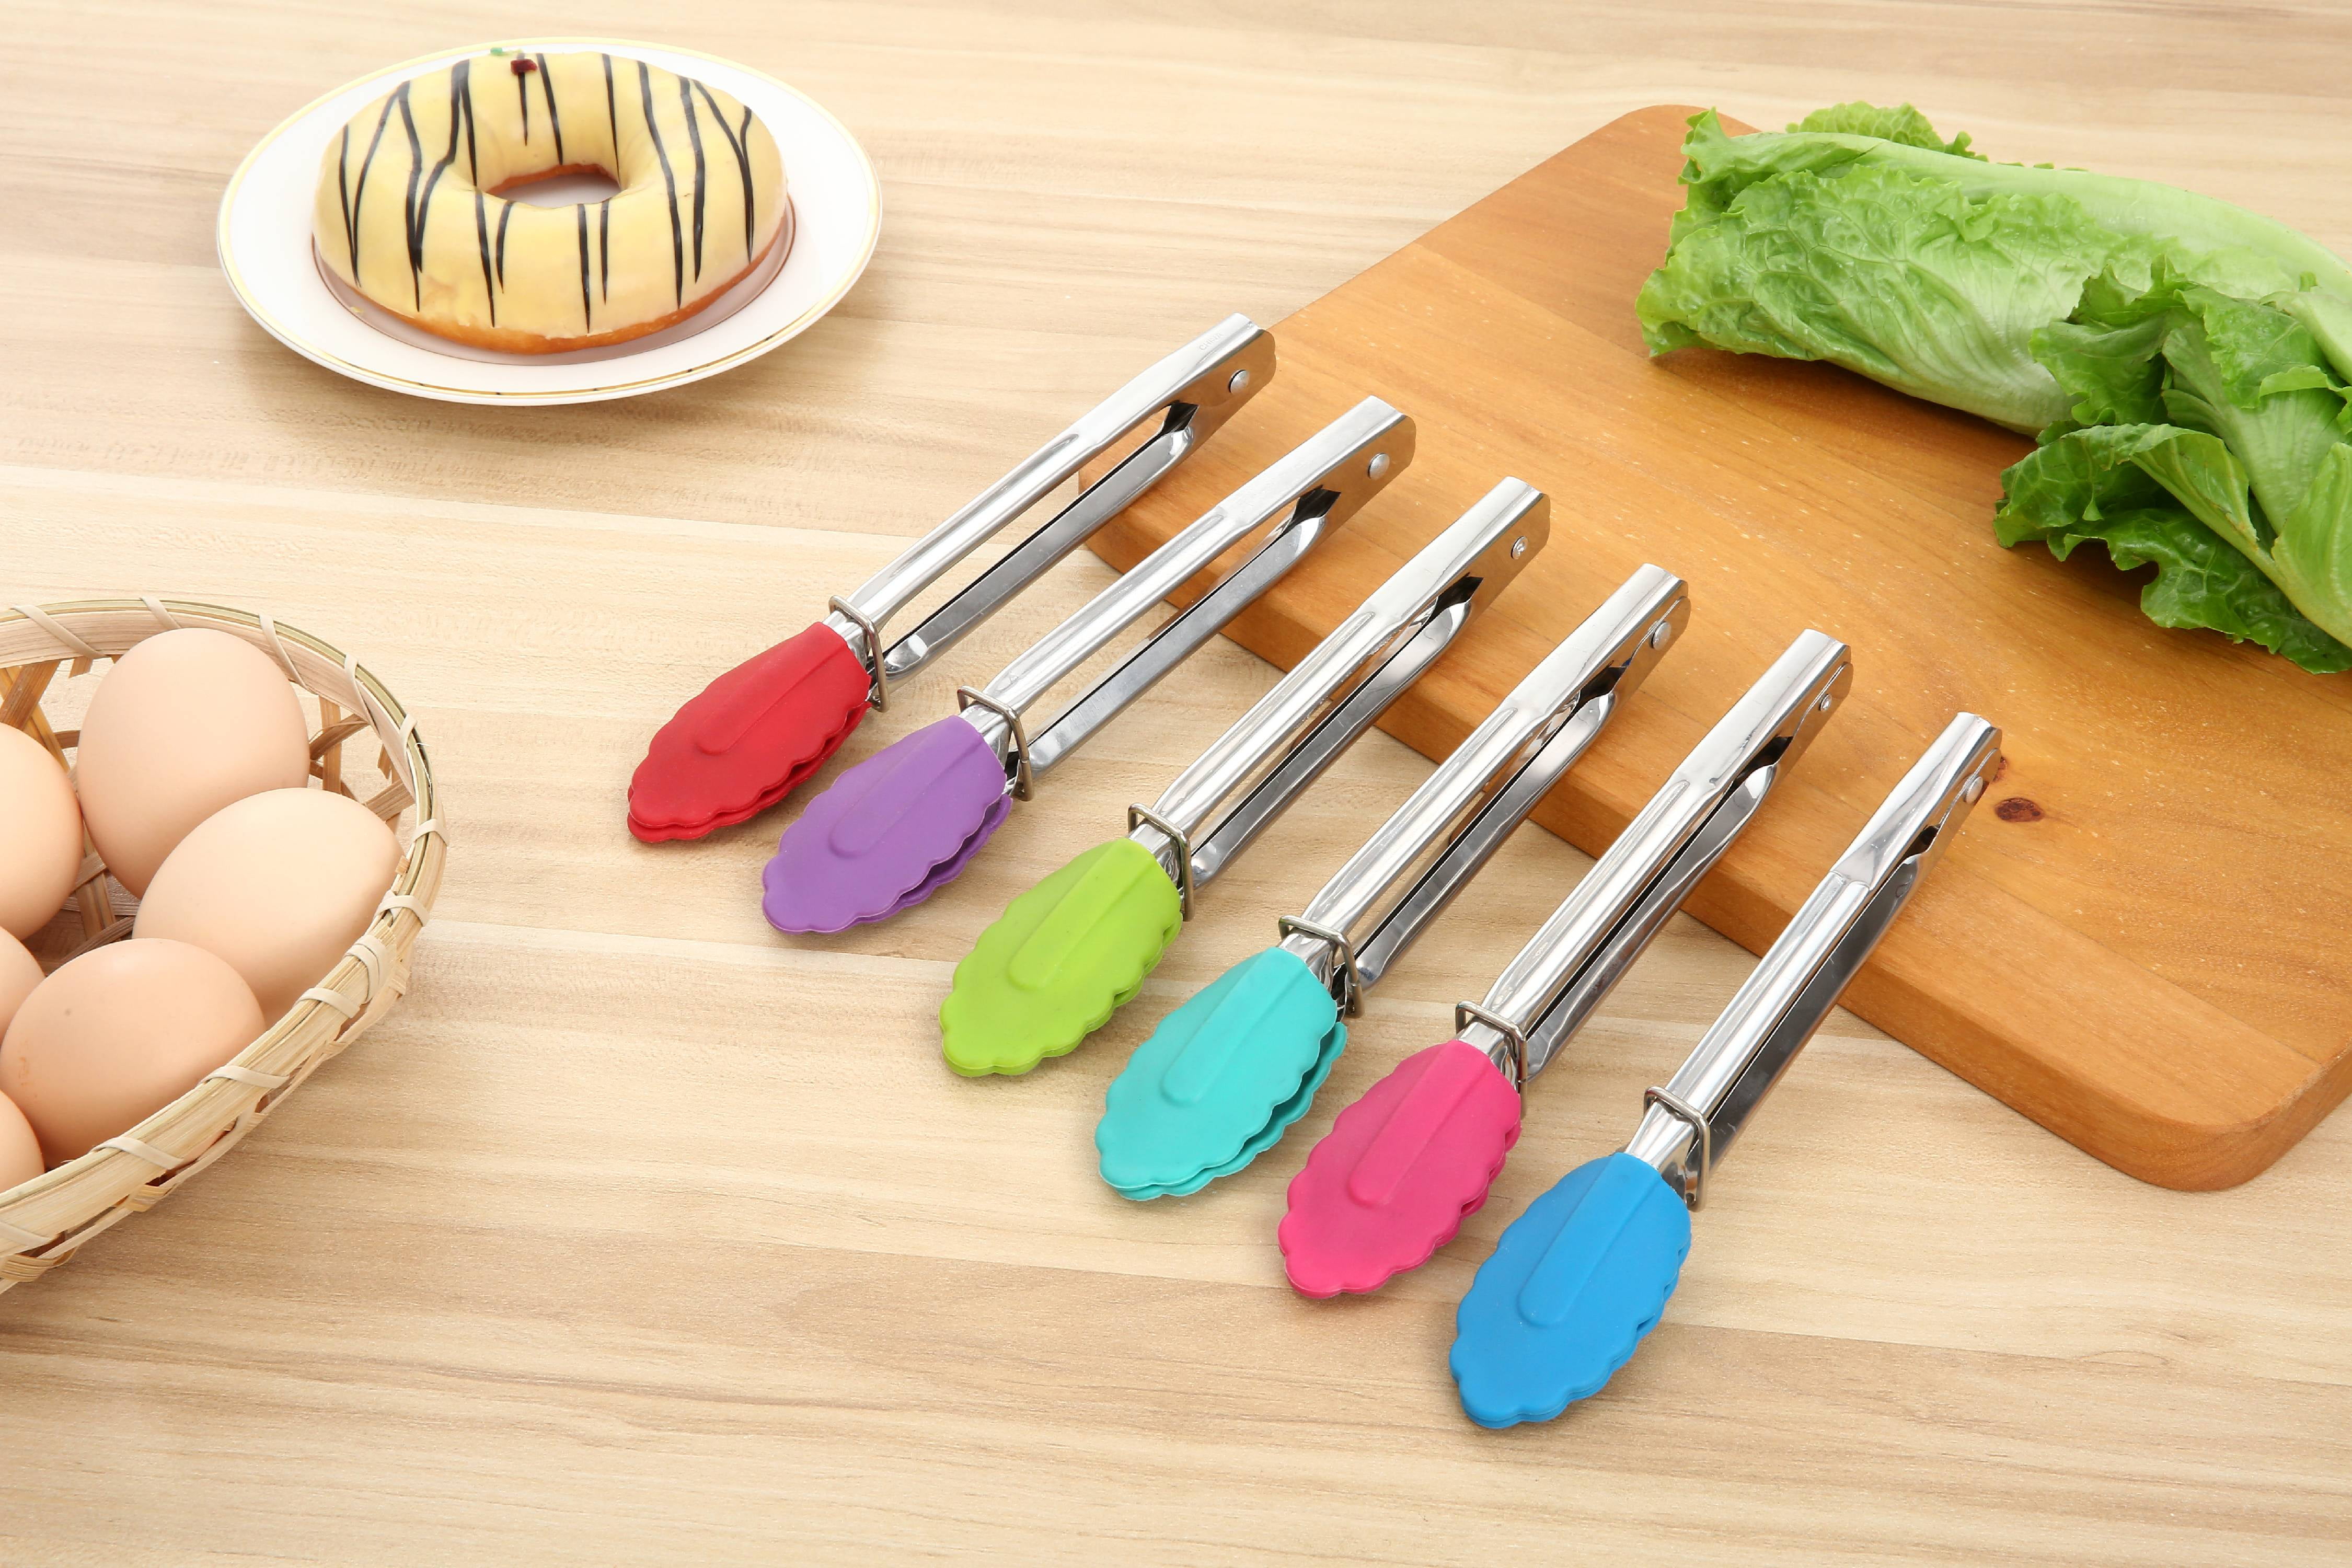 Norpro Mini Stainless Steel Silicone Tipped Food Cooking Serving